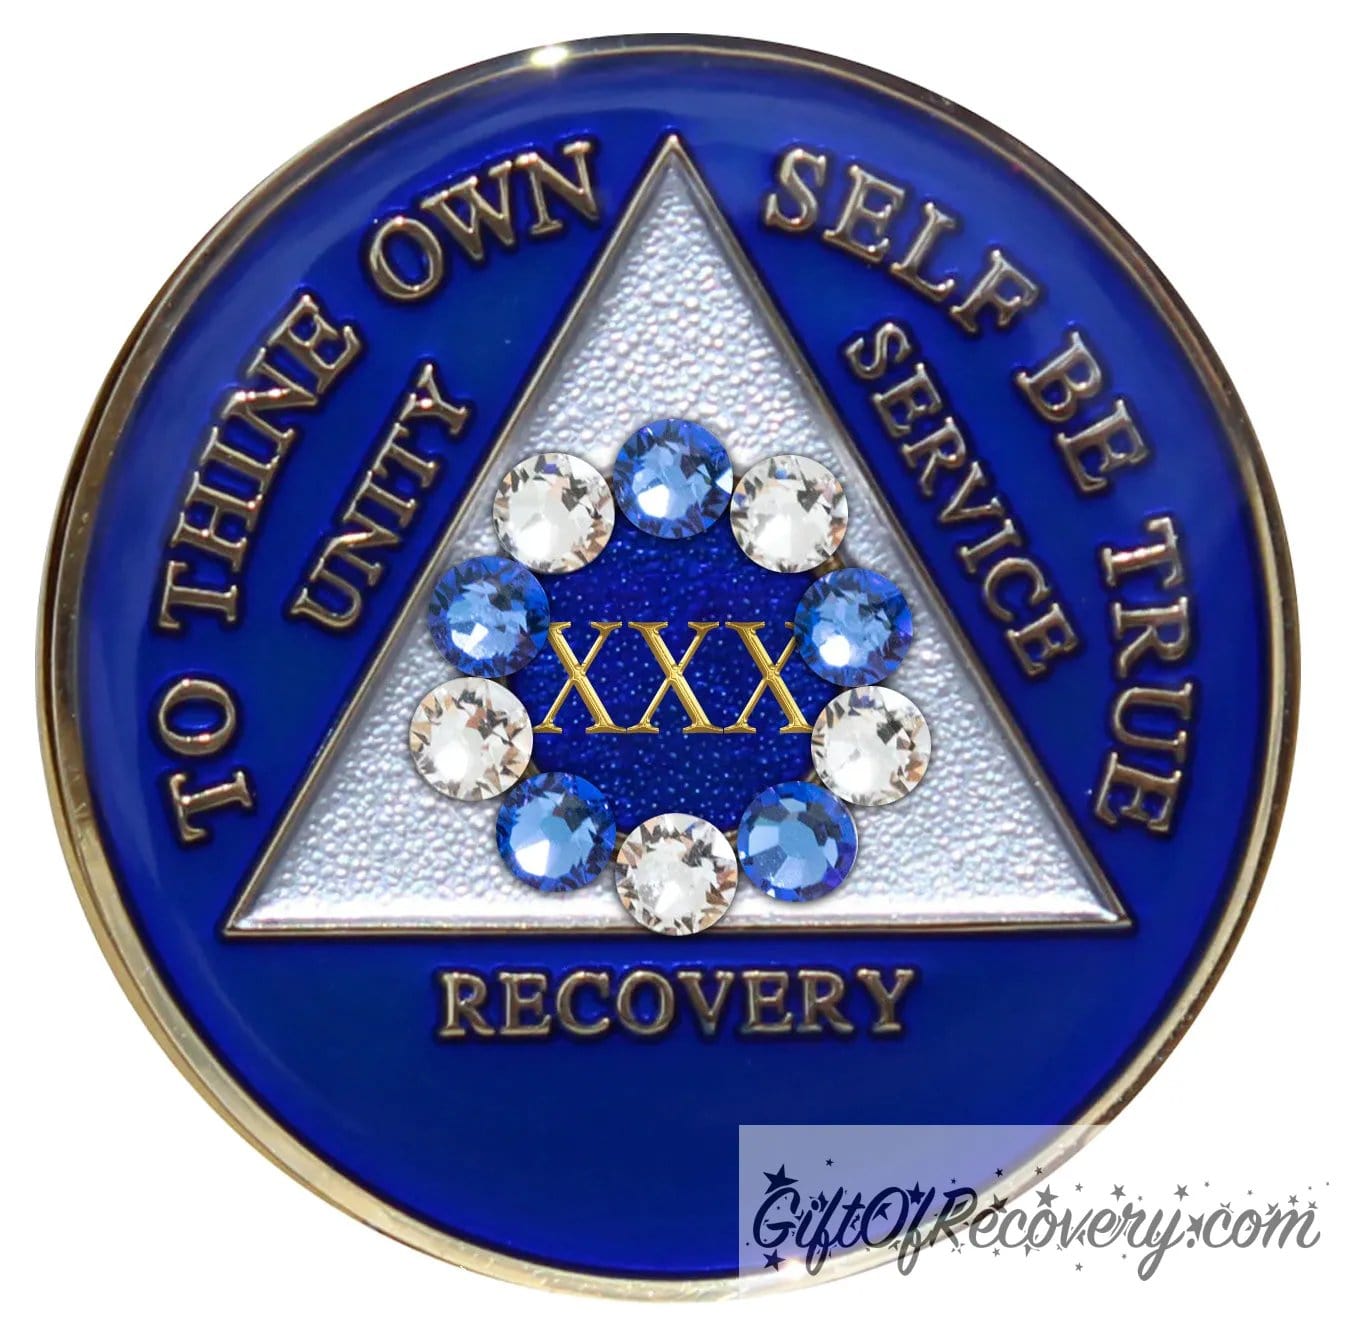 30 Year Big Book Blue AA medallion with 5 blue genuine crystals and 5 clear genuine crystal, making a circle around the 30 year, the recovery medallion has raised lettering to thine own self be true, and the outer rim of the medallion in 14k gold, inside the triangle is white and blue, emphasizing action and reflection.